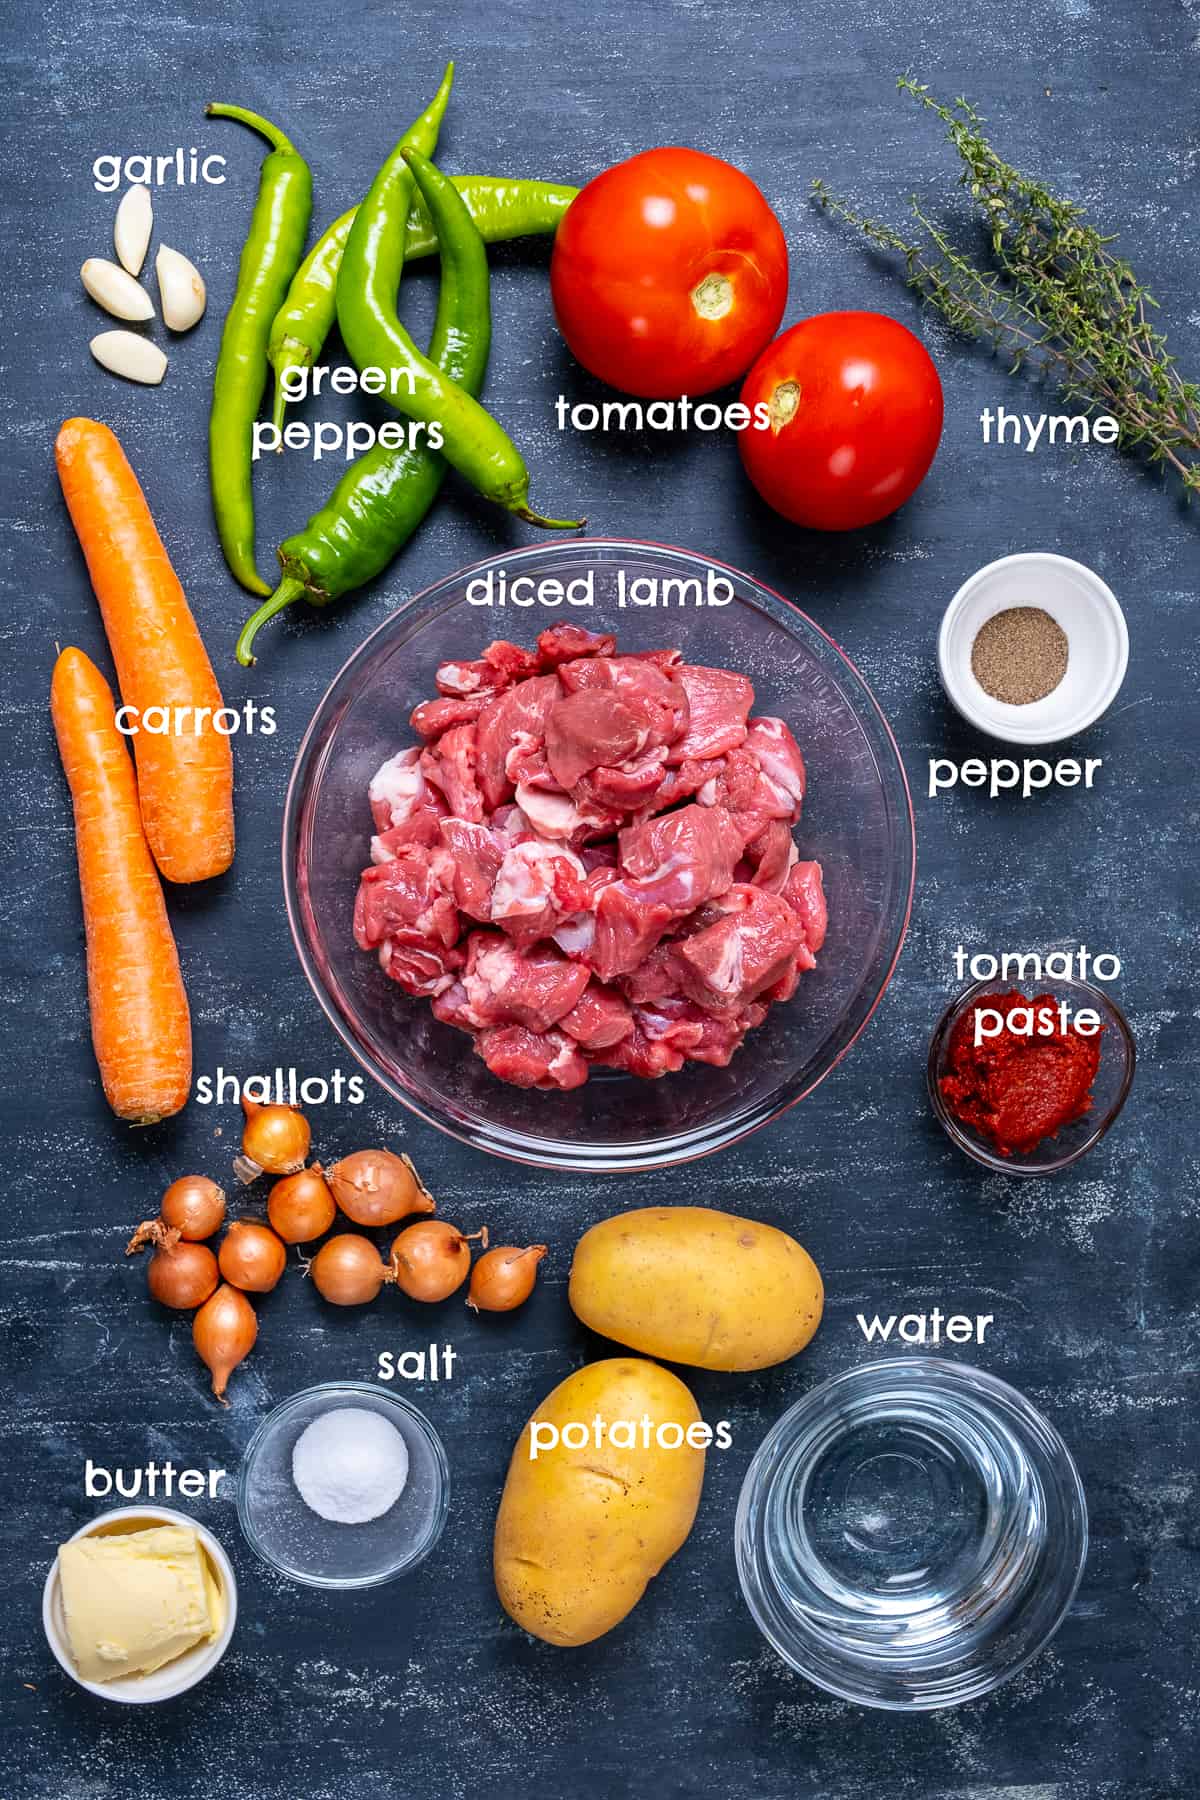 Diced lamb, tomatoes, peppers, carrots, shallots, potatoes, garlic cloves, fresh thyme, butter, tomato paste on a dark background.